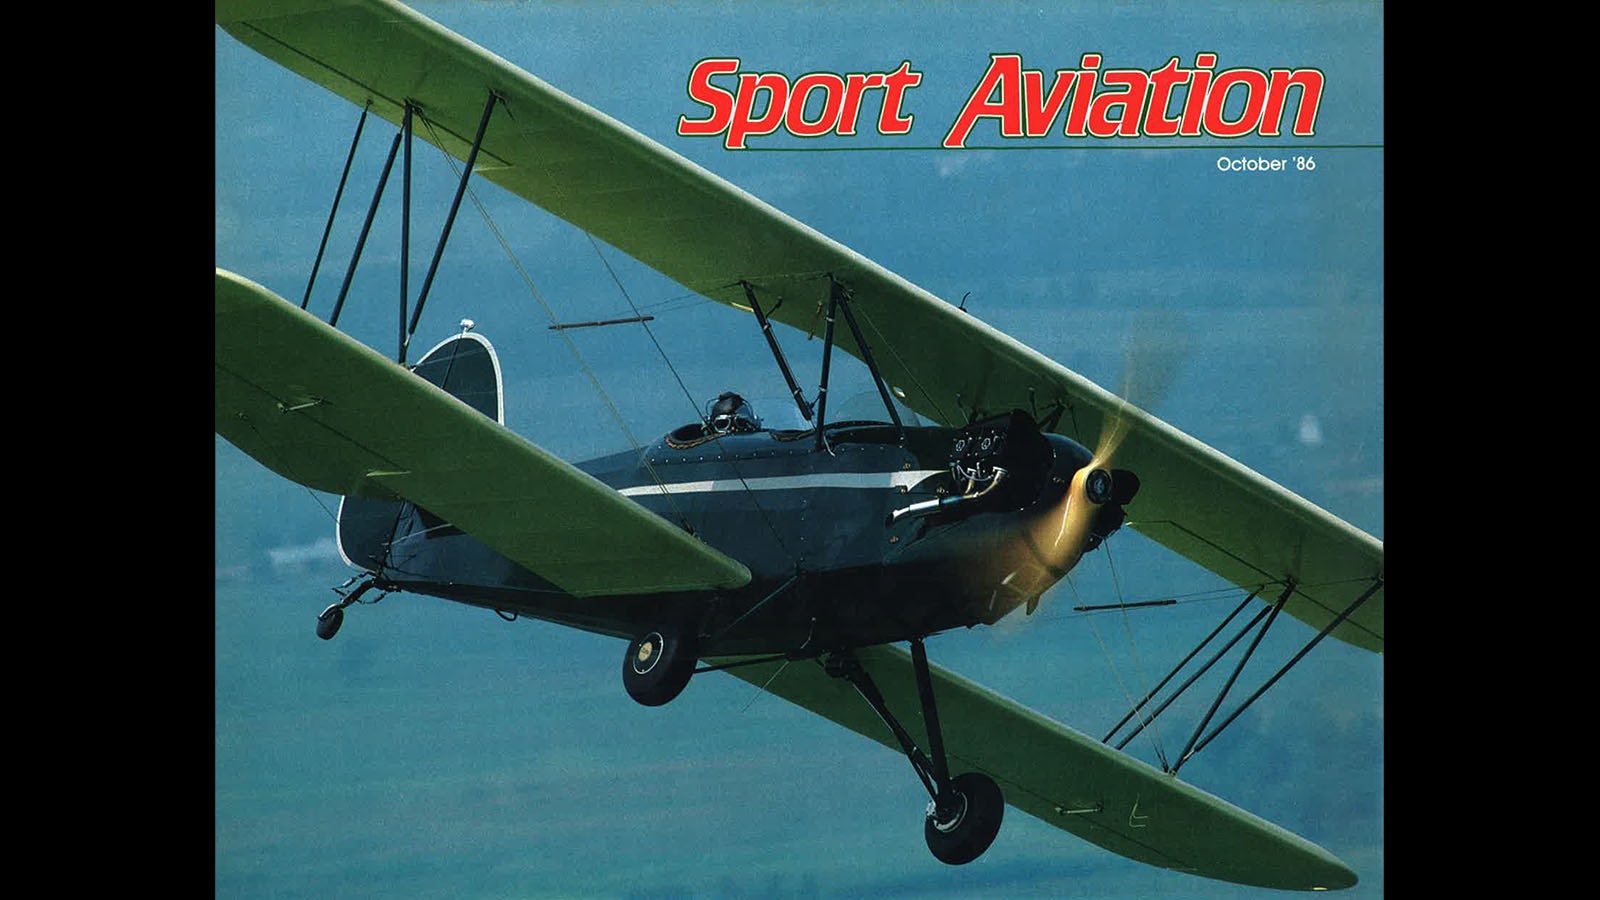 The Tizzy Lish became a famous biplane when it won Grand Champion at national air show in 1986, landing it on the cover of the October 1986 edition of Sport Aviation magazine.